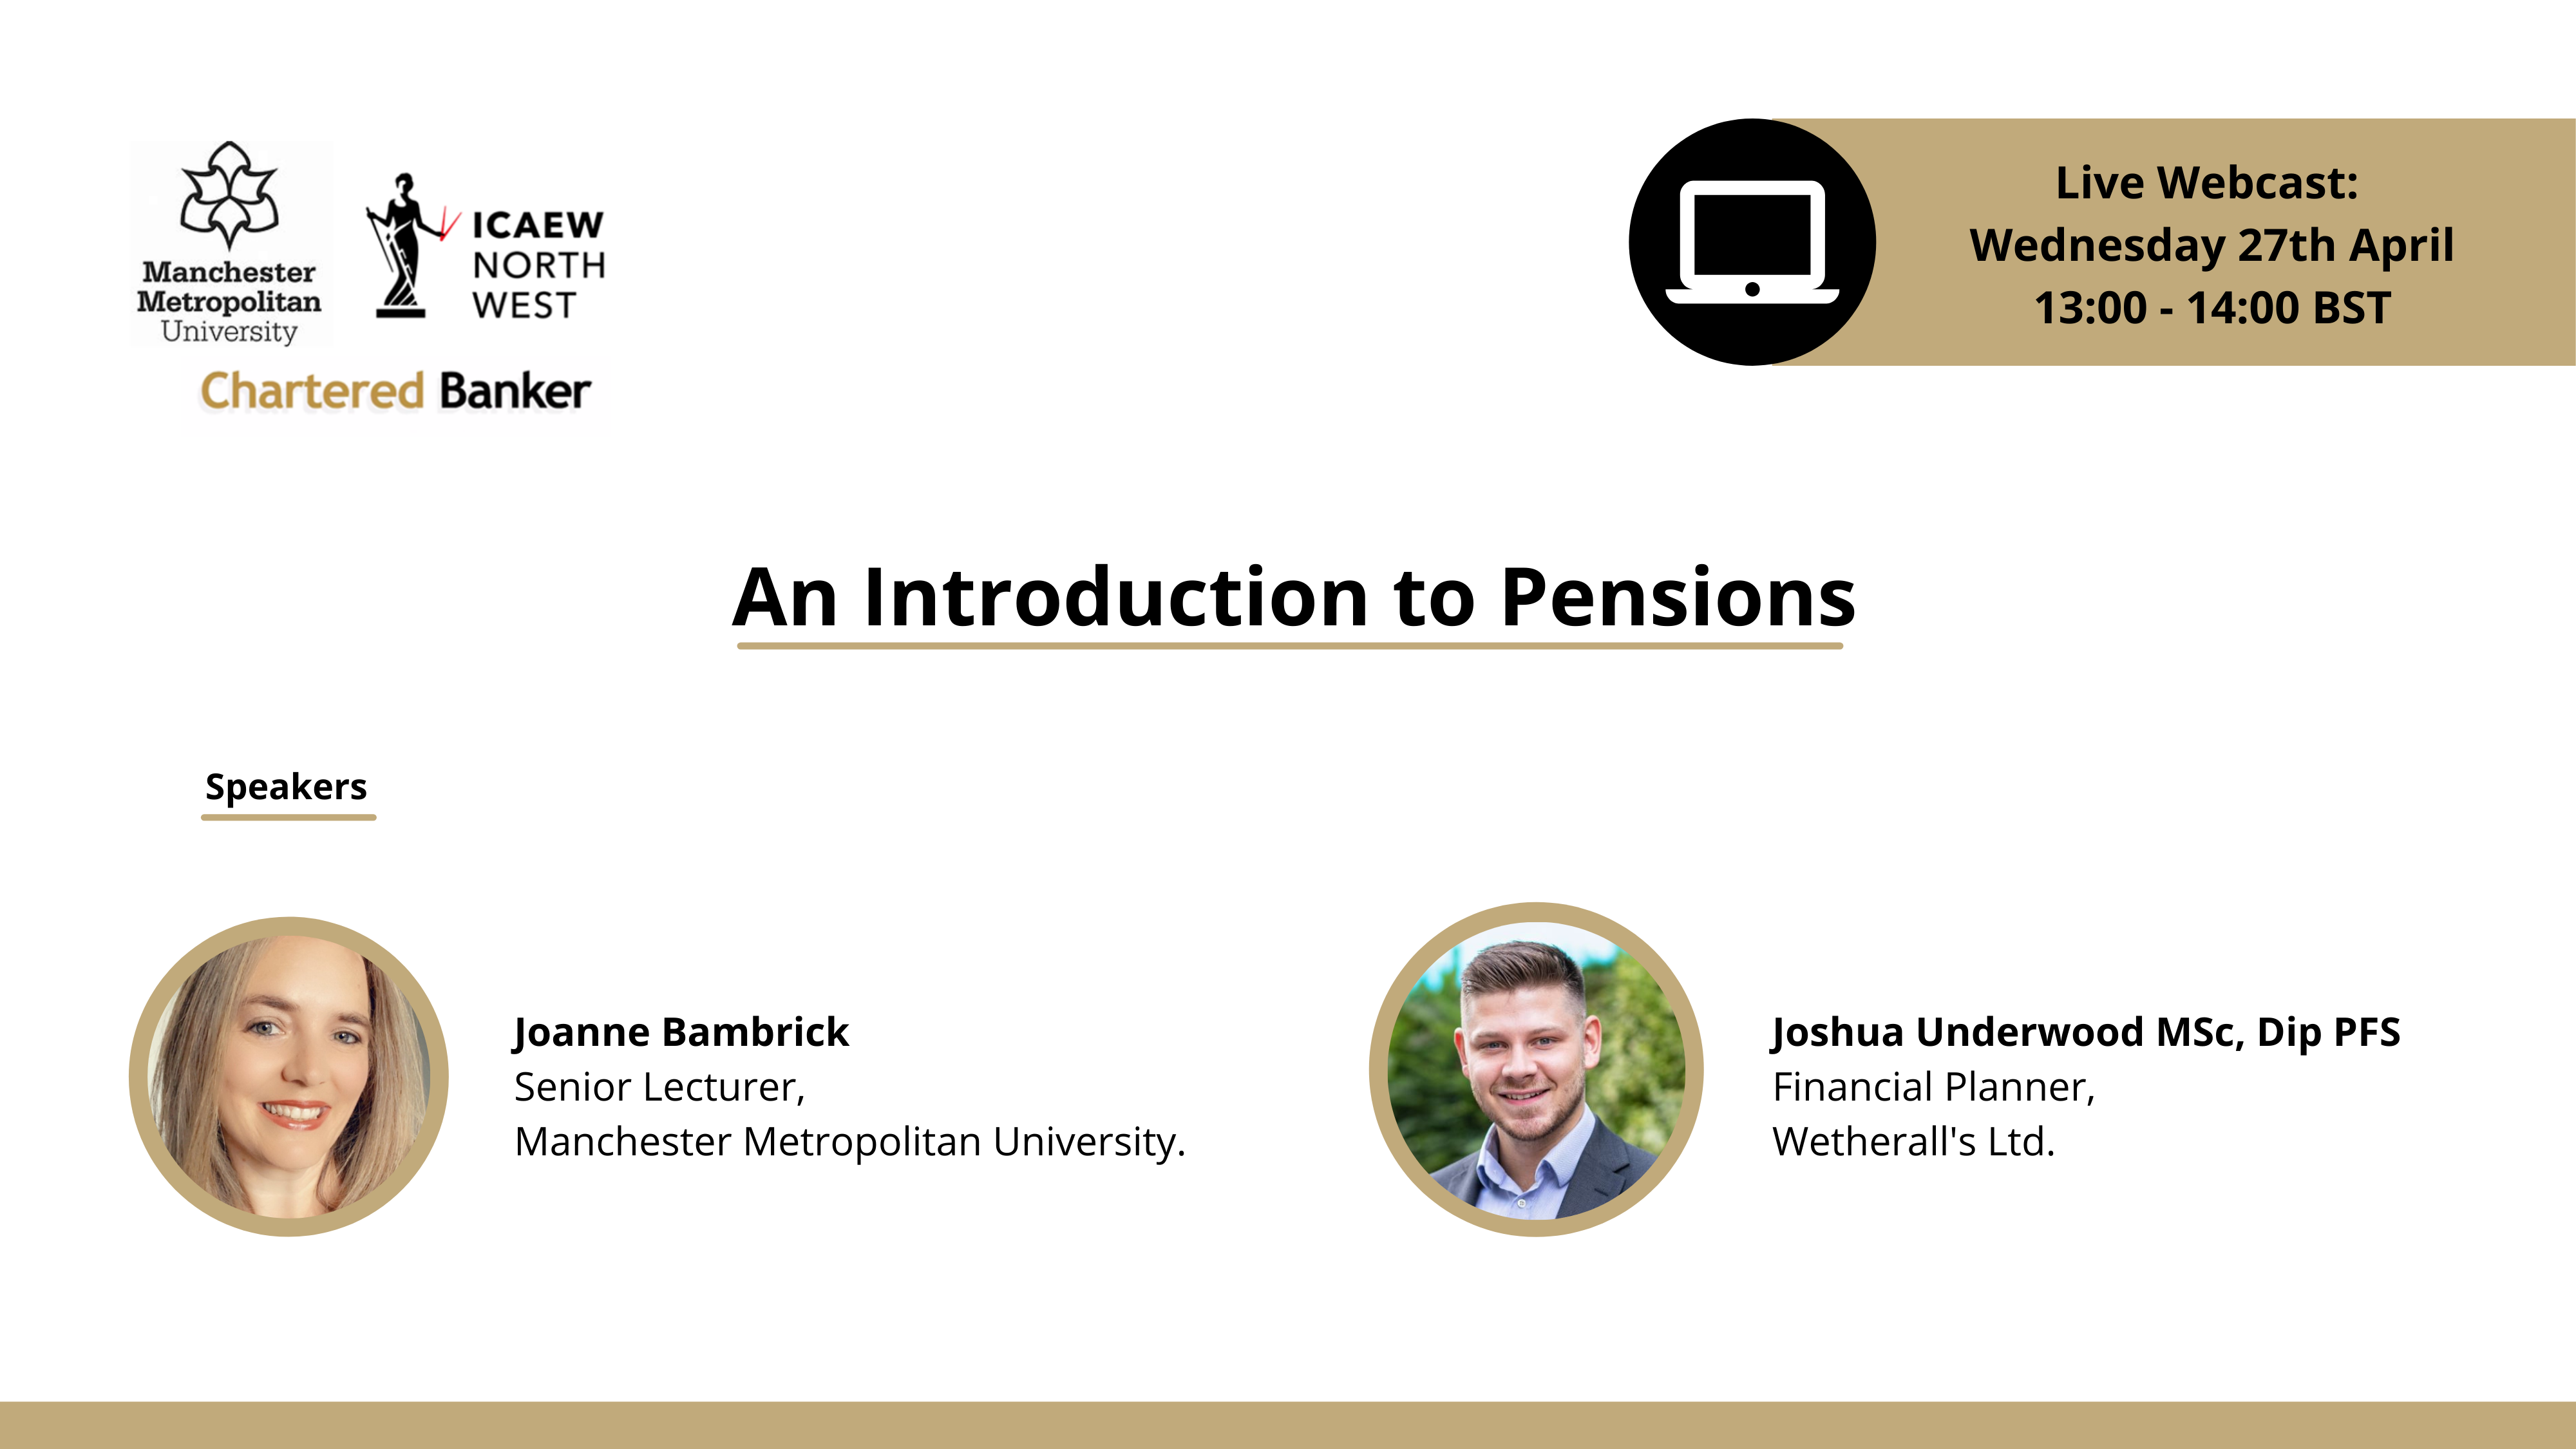 An Introduction to Pensions